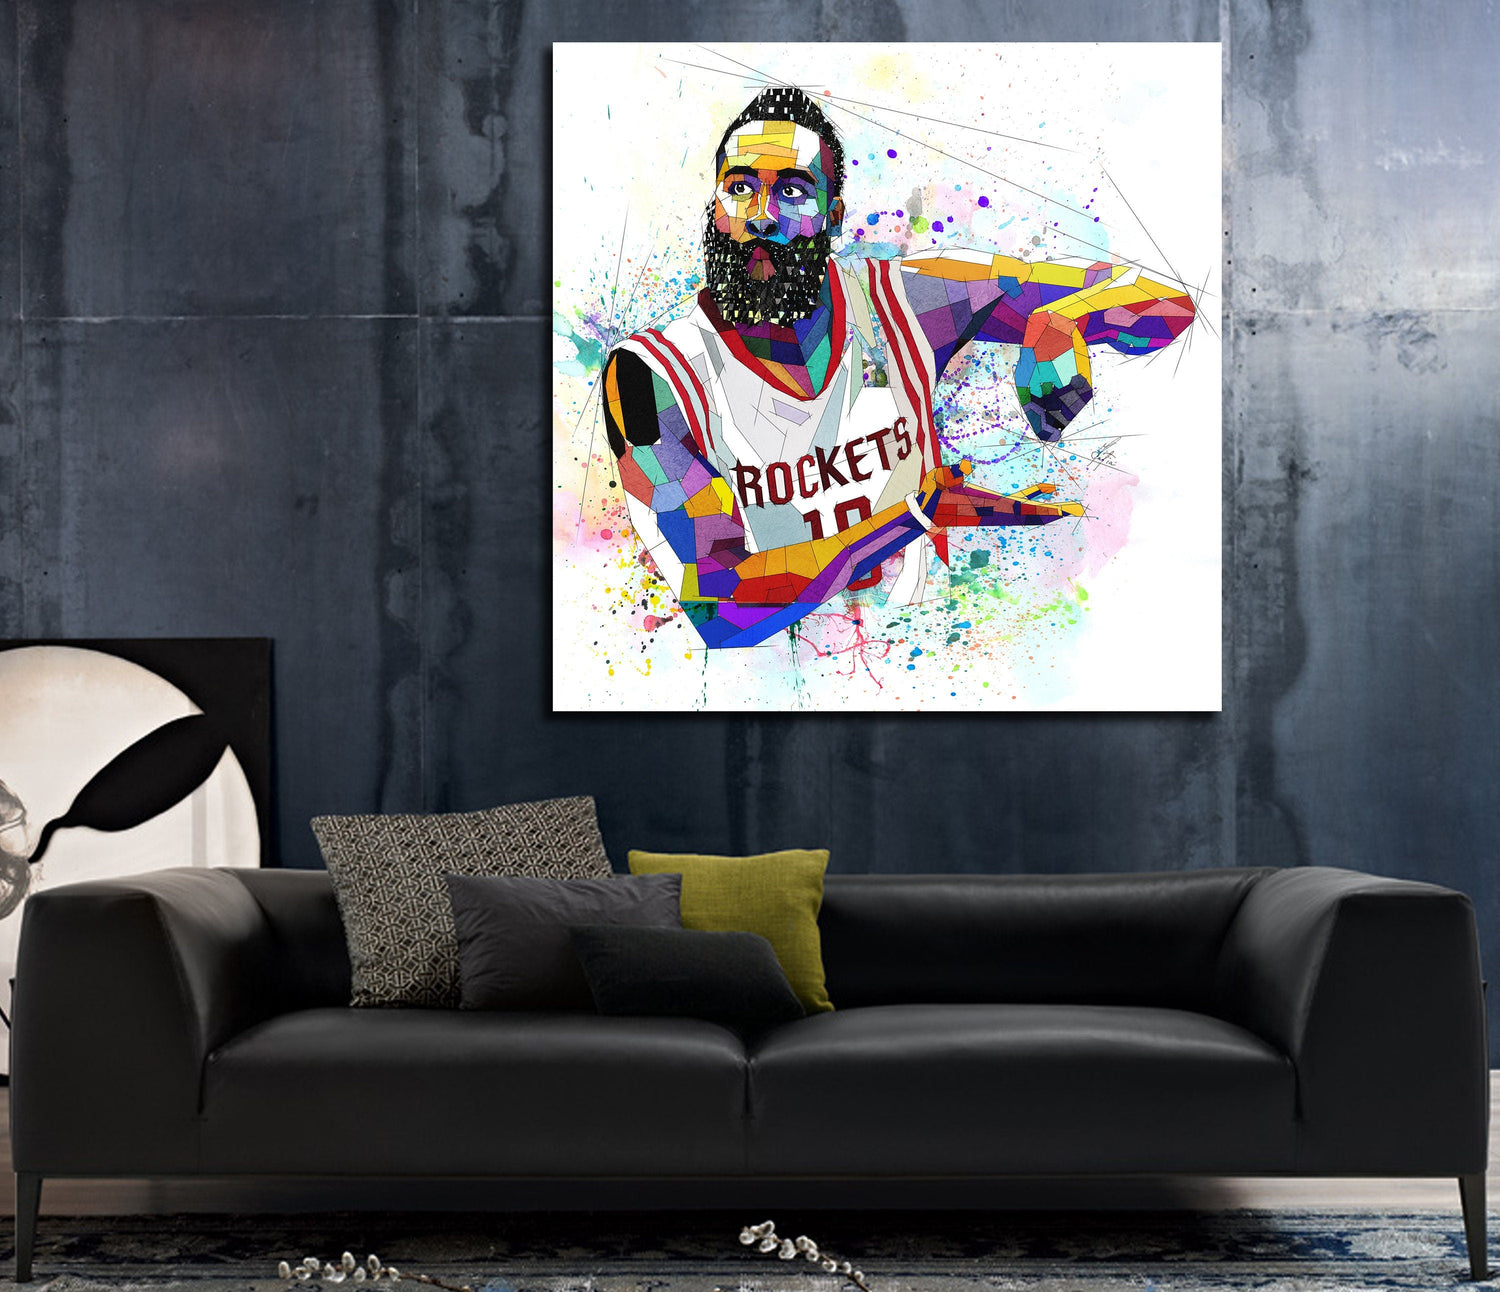  STAINA Poster Basketball Player James Harden Picture(162)  Canvas Art Poster And Wall Art Picture Print Modern Family Bedroom Decor  Posters 20x30inch(50x75cm): Posters & Prints